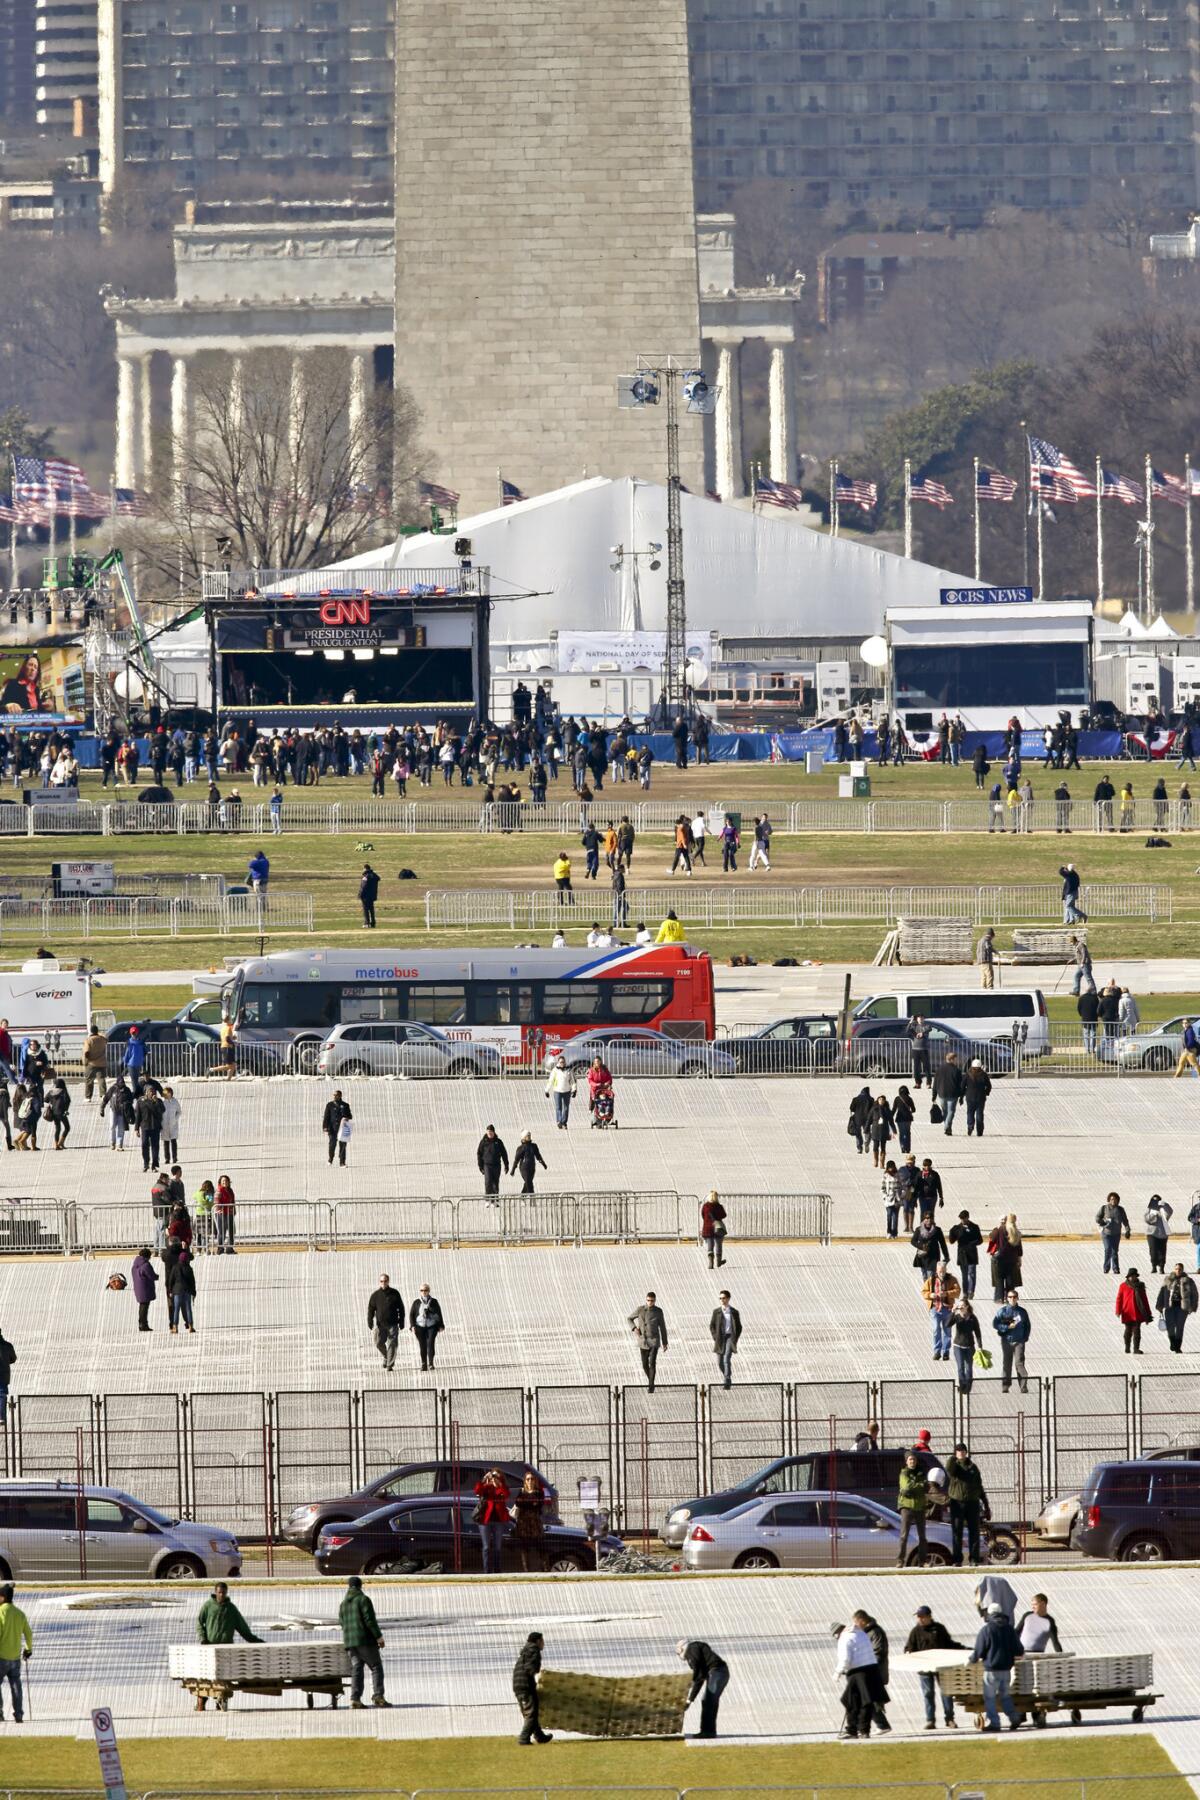 Crews lay down mats to protect the lawn on the National Mall before President Obama's second inauguration in 2013. (J. Scott Applewhite / AP)